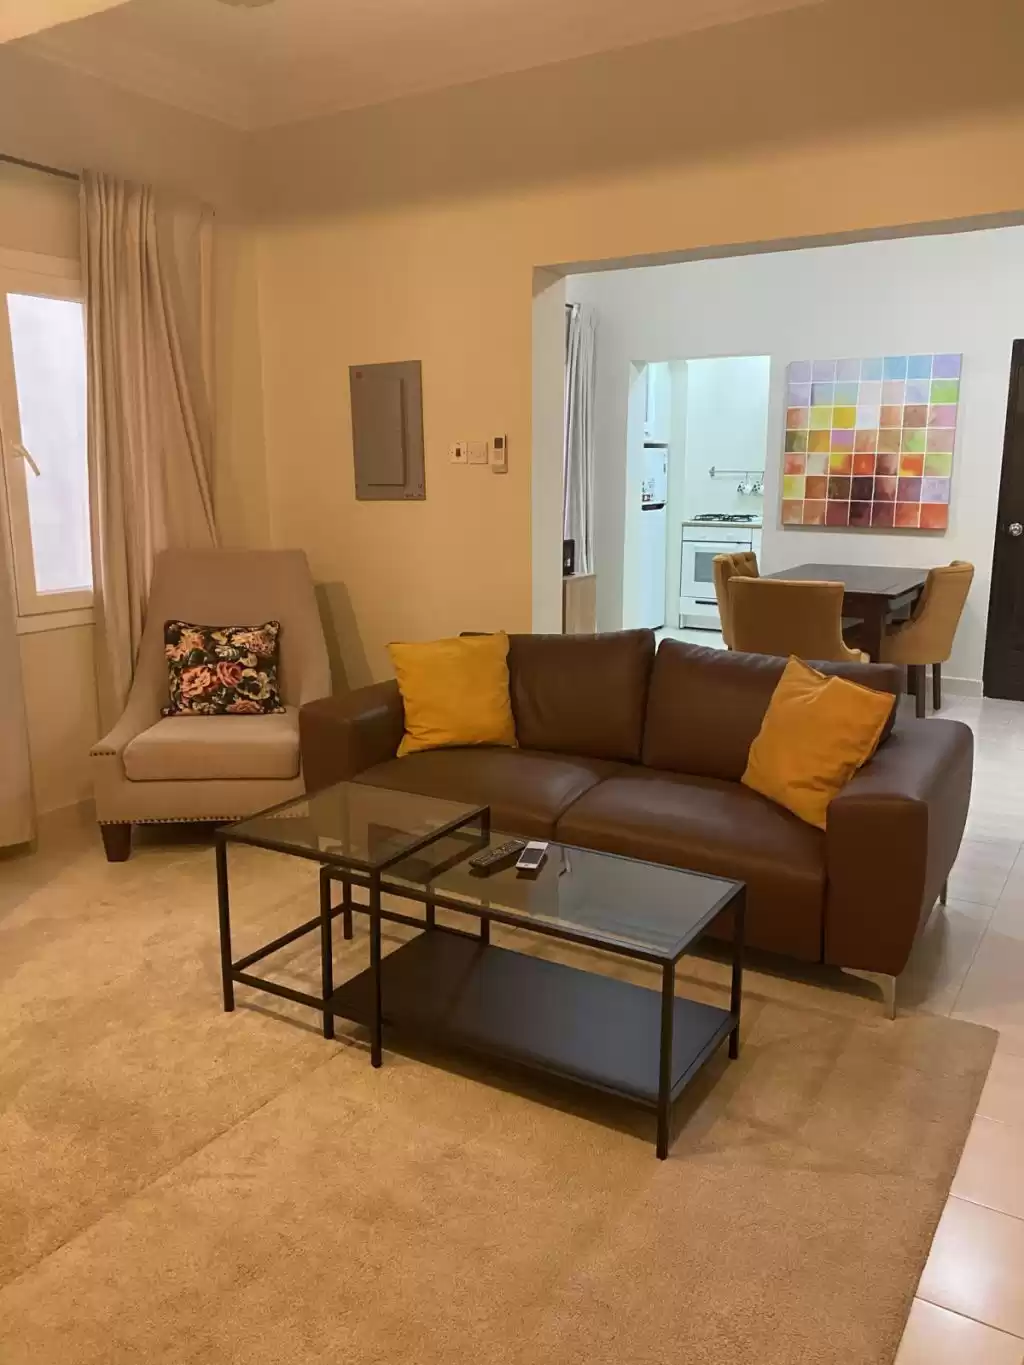 Residential Ready Property 1 Bedroom F/F Apartment  for rent in Al Sadd , Doha #13369 - 1  image 